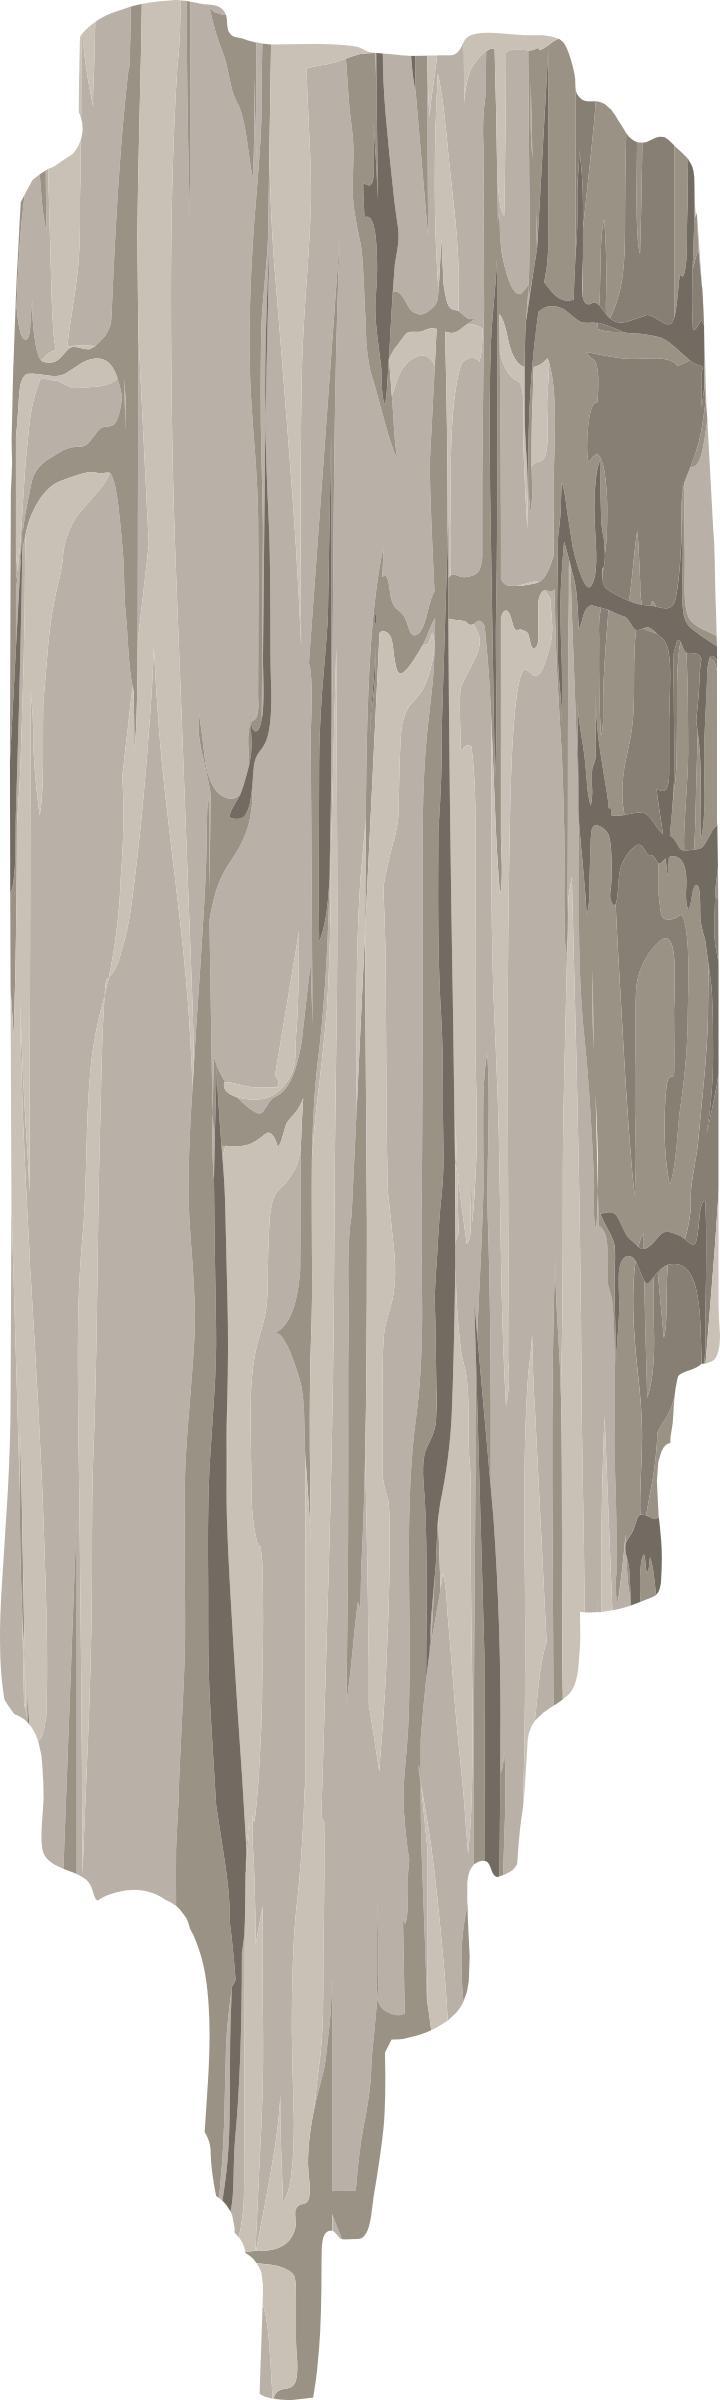 Alpine Landscape Cliff Side Highlight Long Mountaineering 01a Al1 png transparent